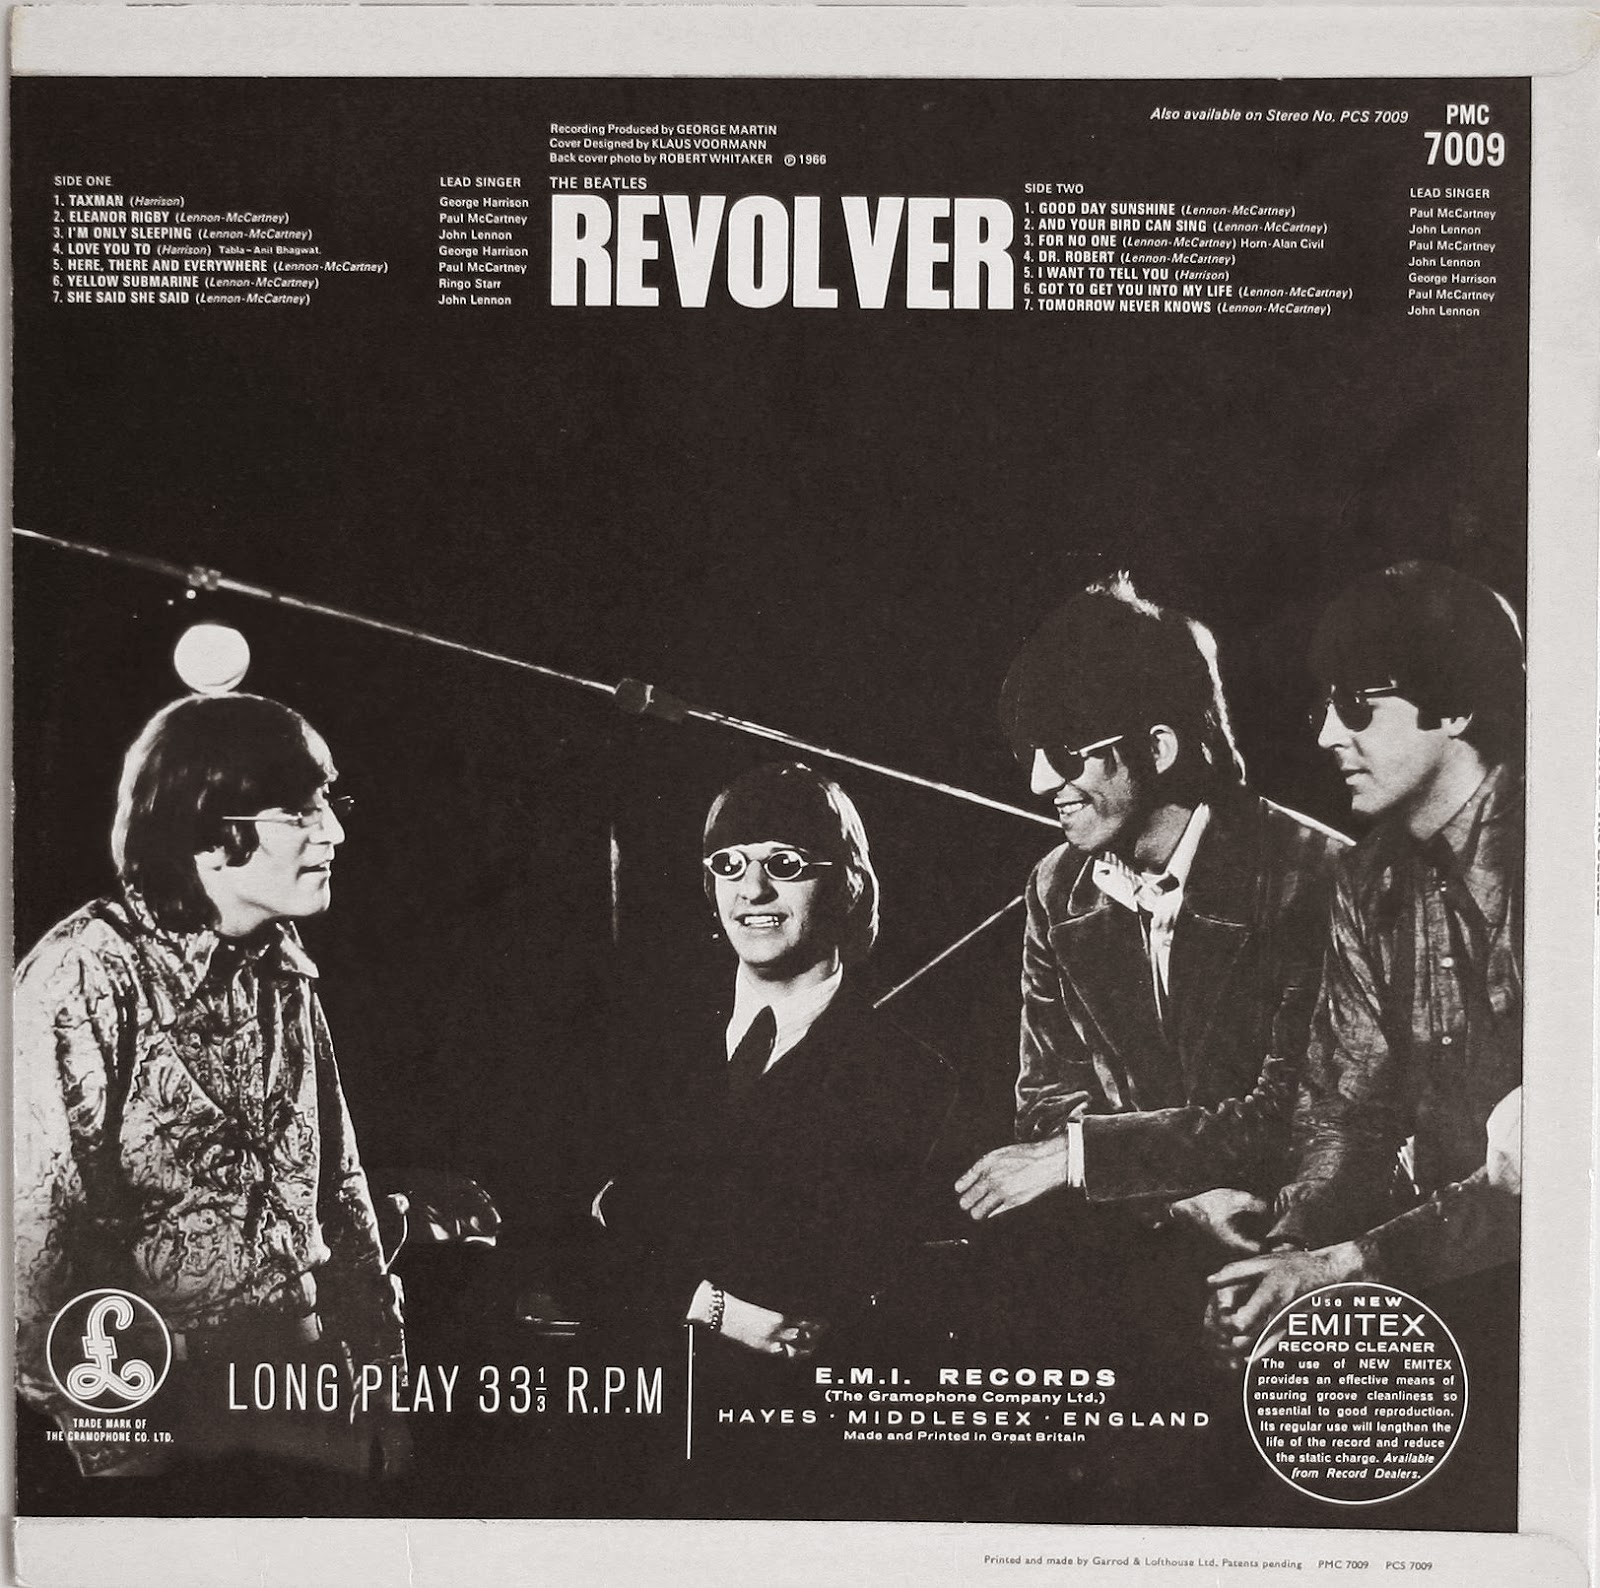 The Daily Beatle has moved!: Album covers: Revolver